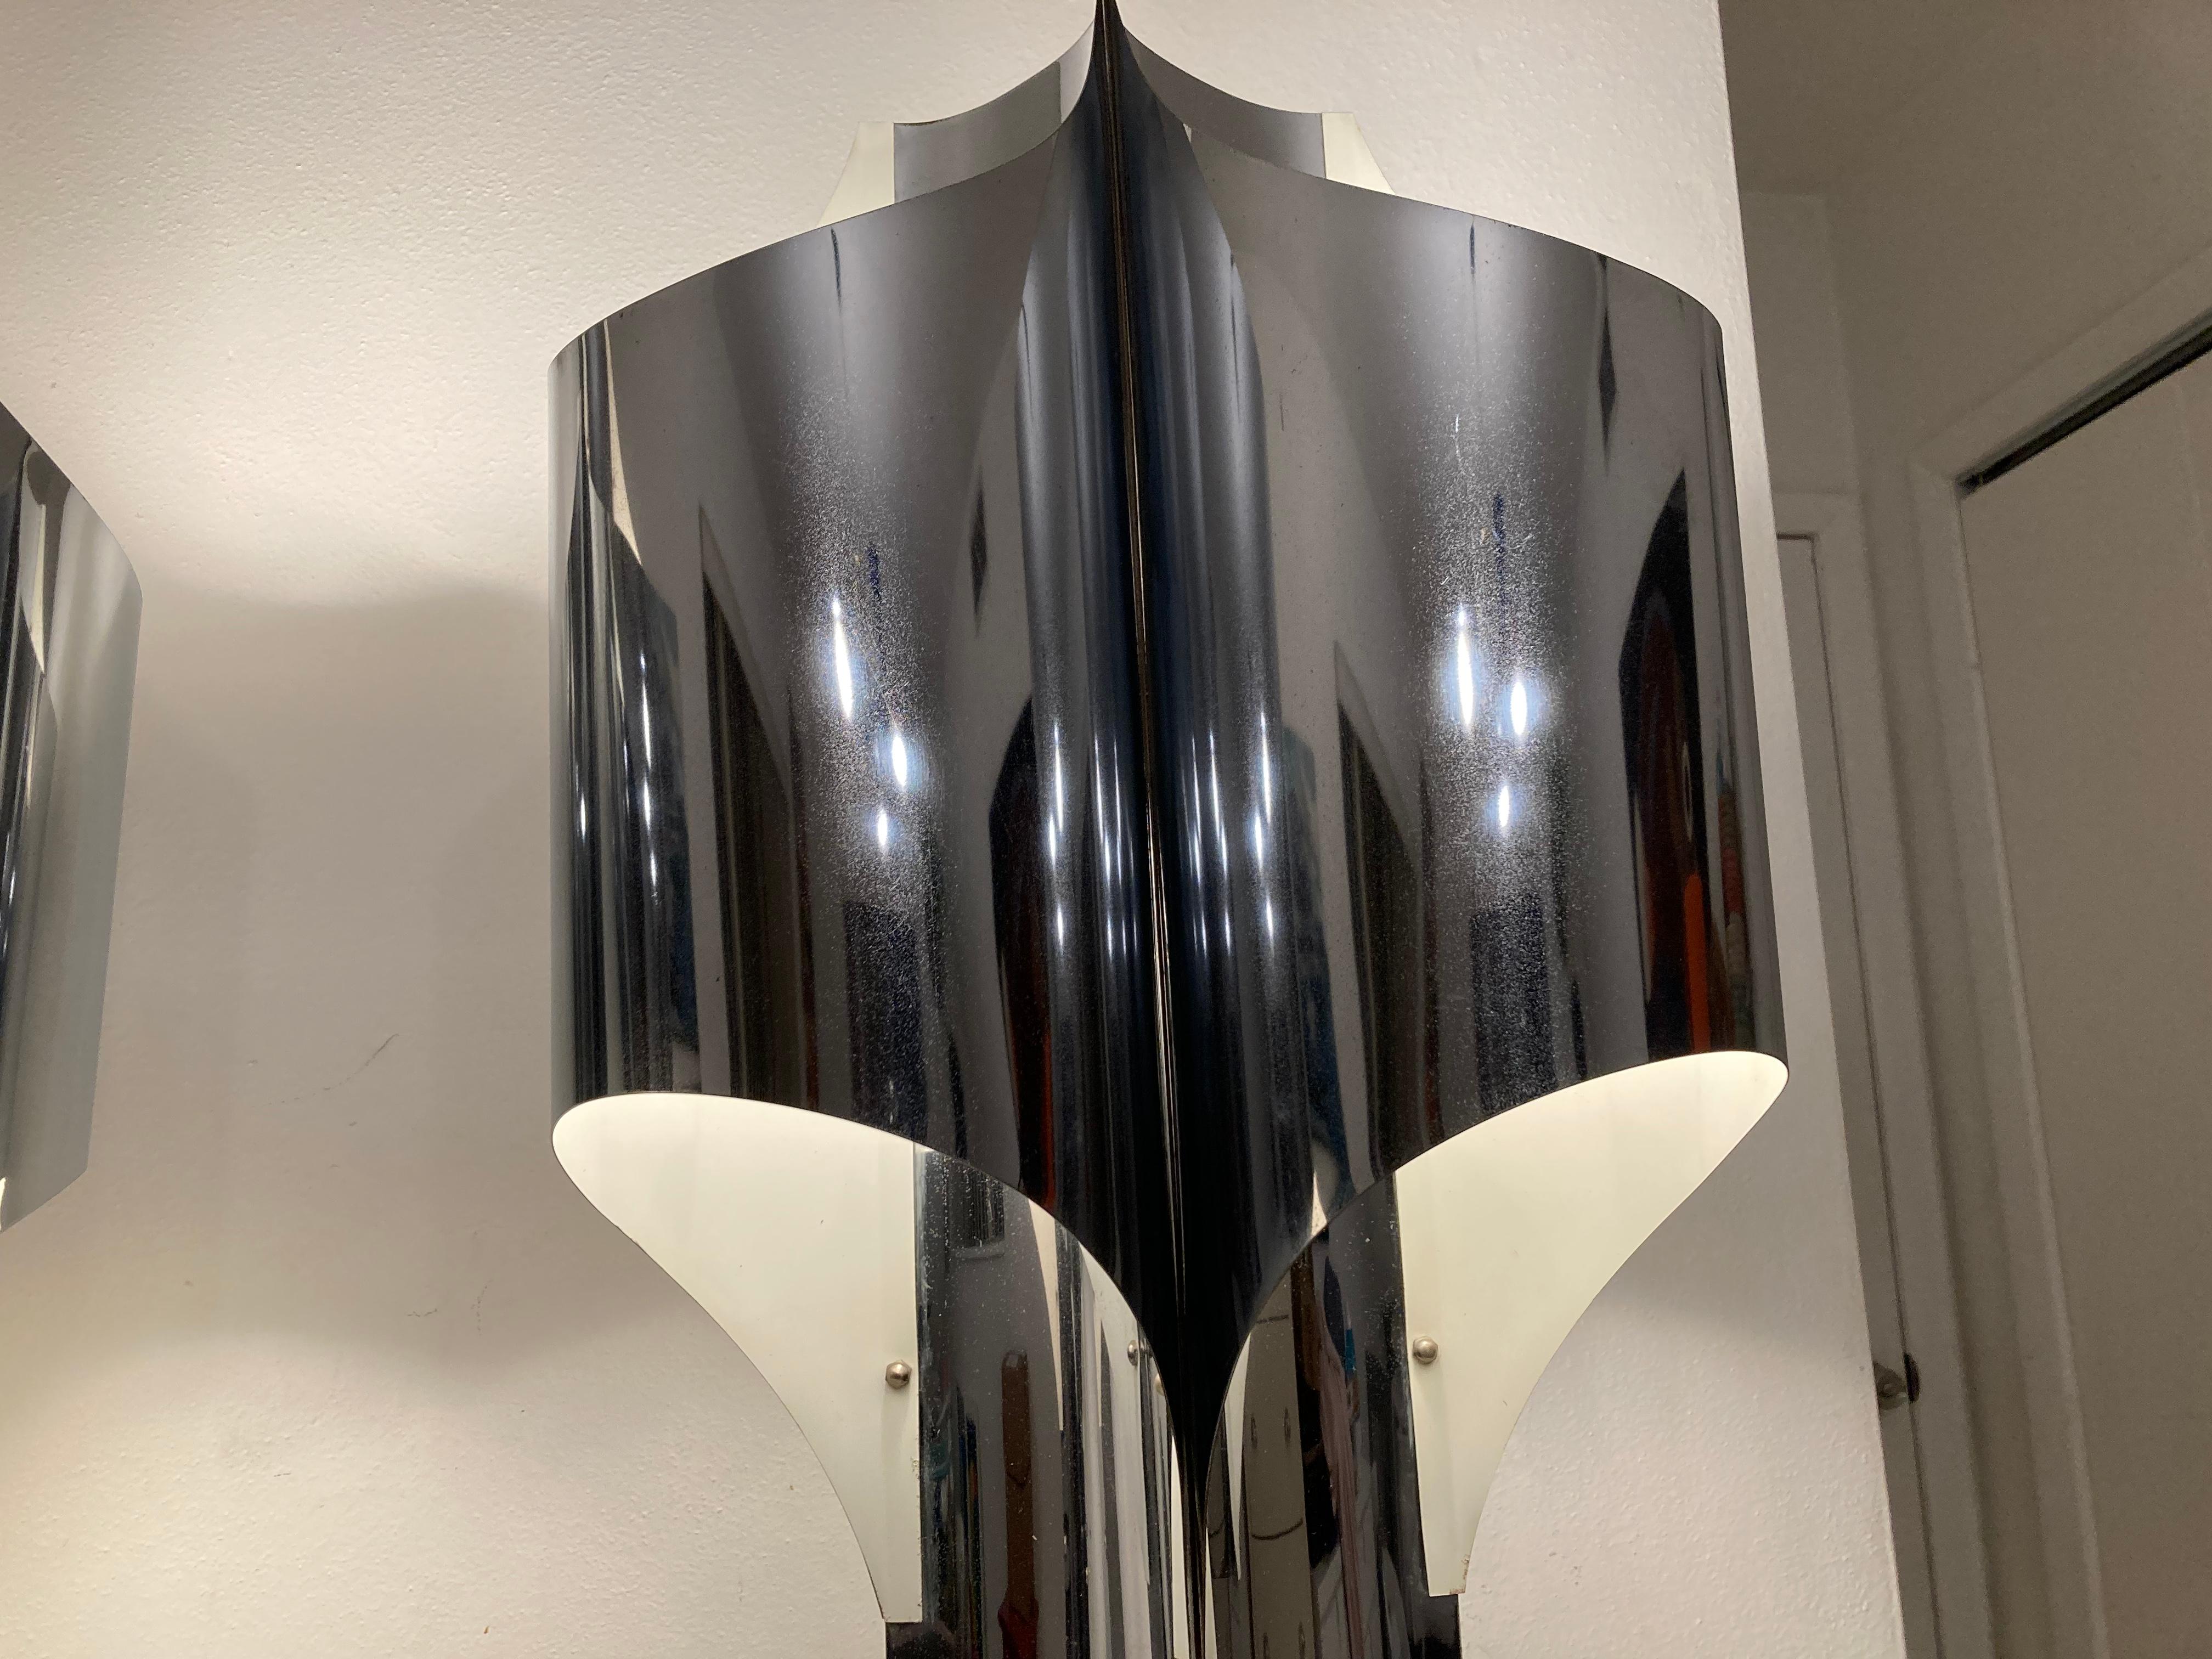 Pair of Large Chrome Table Lamps by Robert Sonneman, USA, 1960s For Sale 7